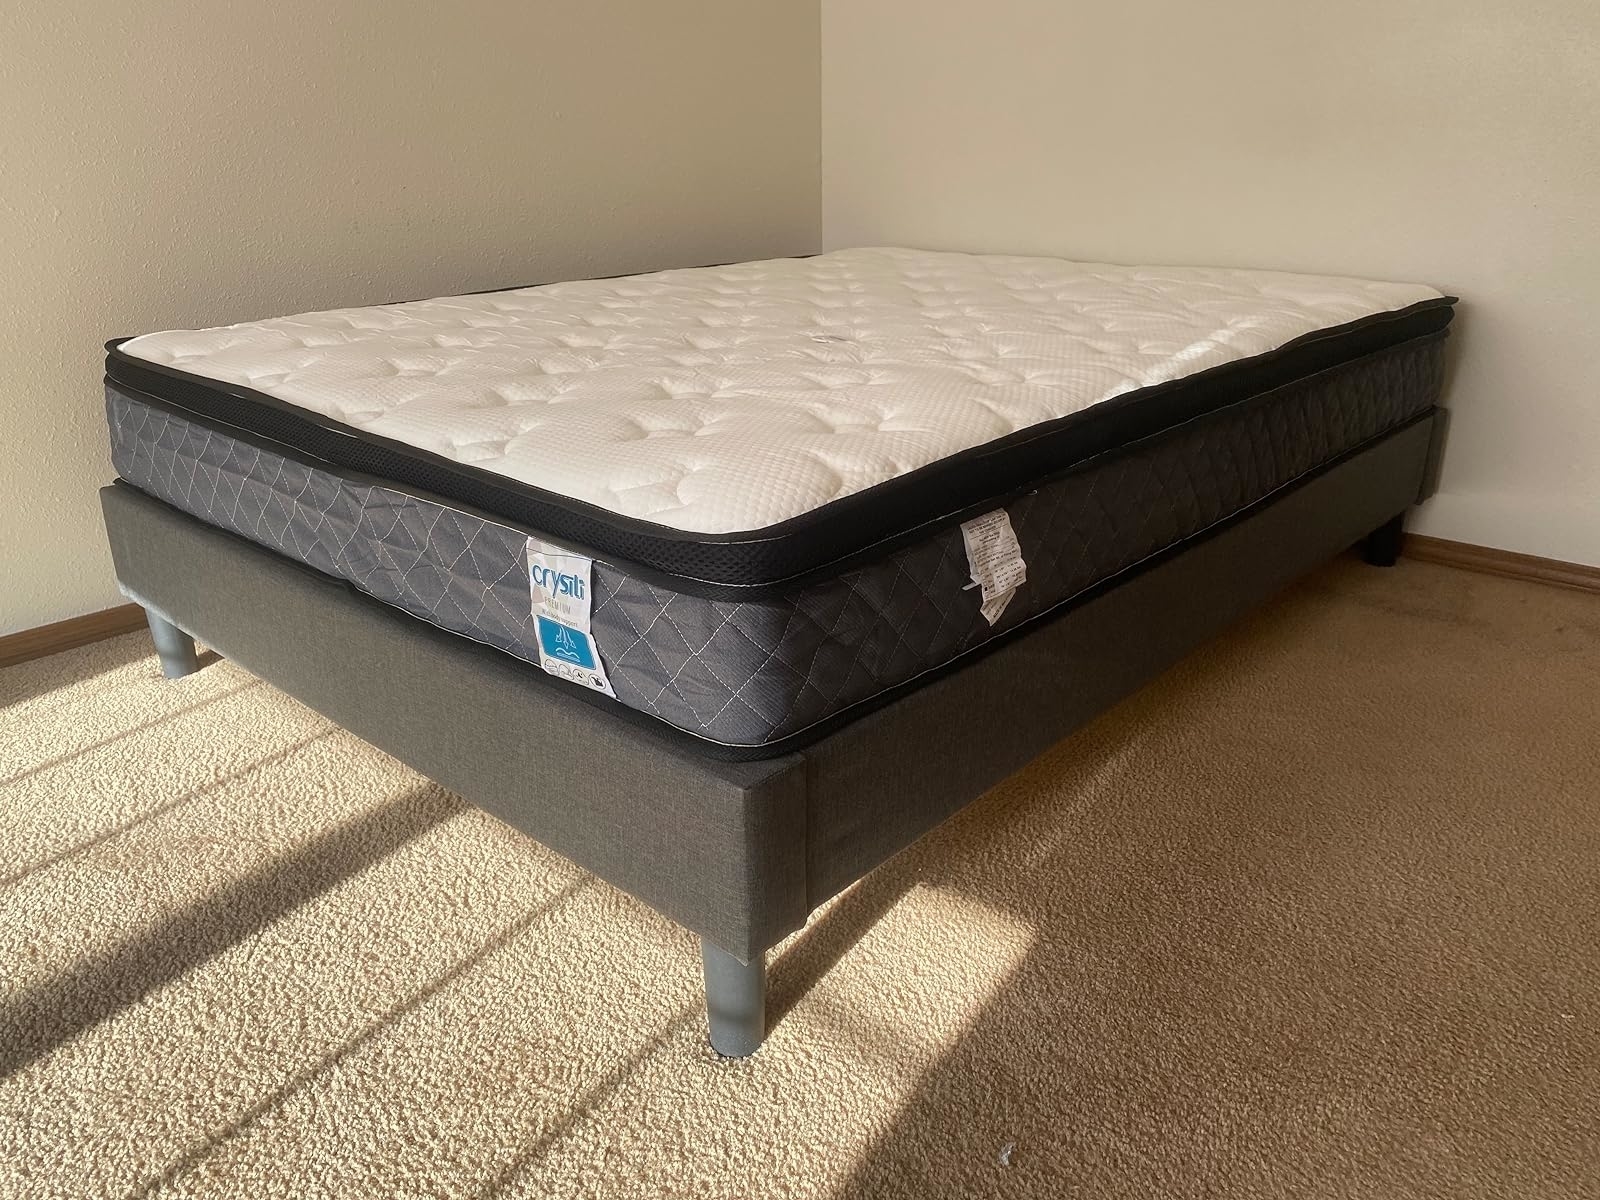 New mattress on a bed frame with tags attached, shown in a sunny room